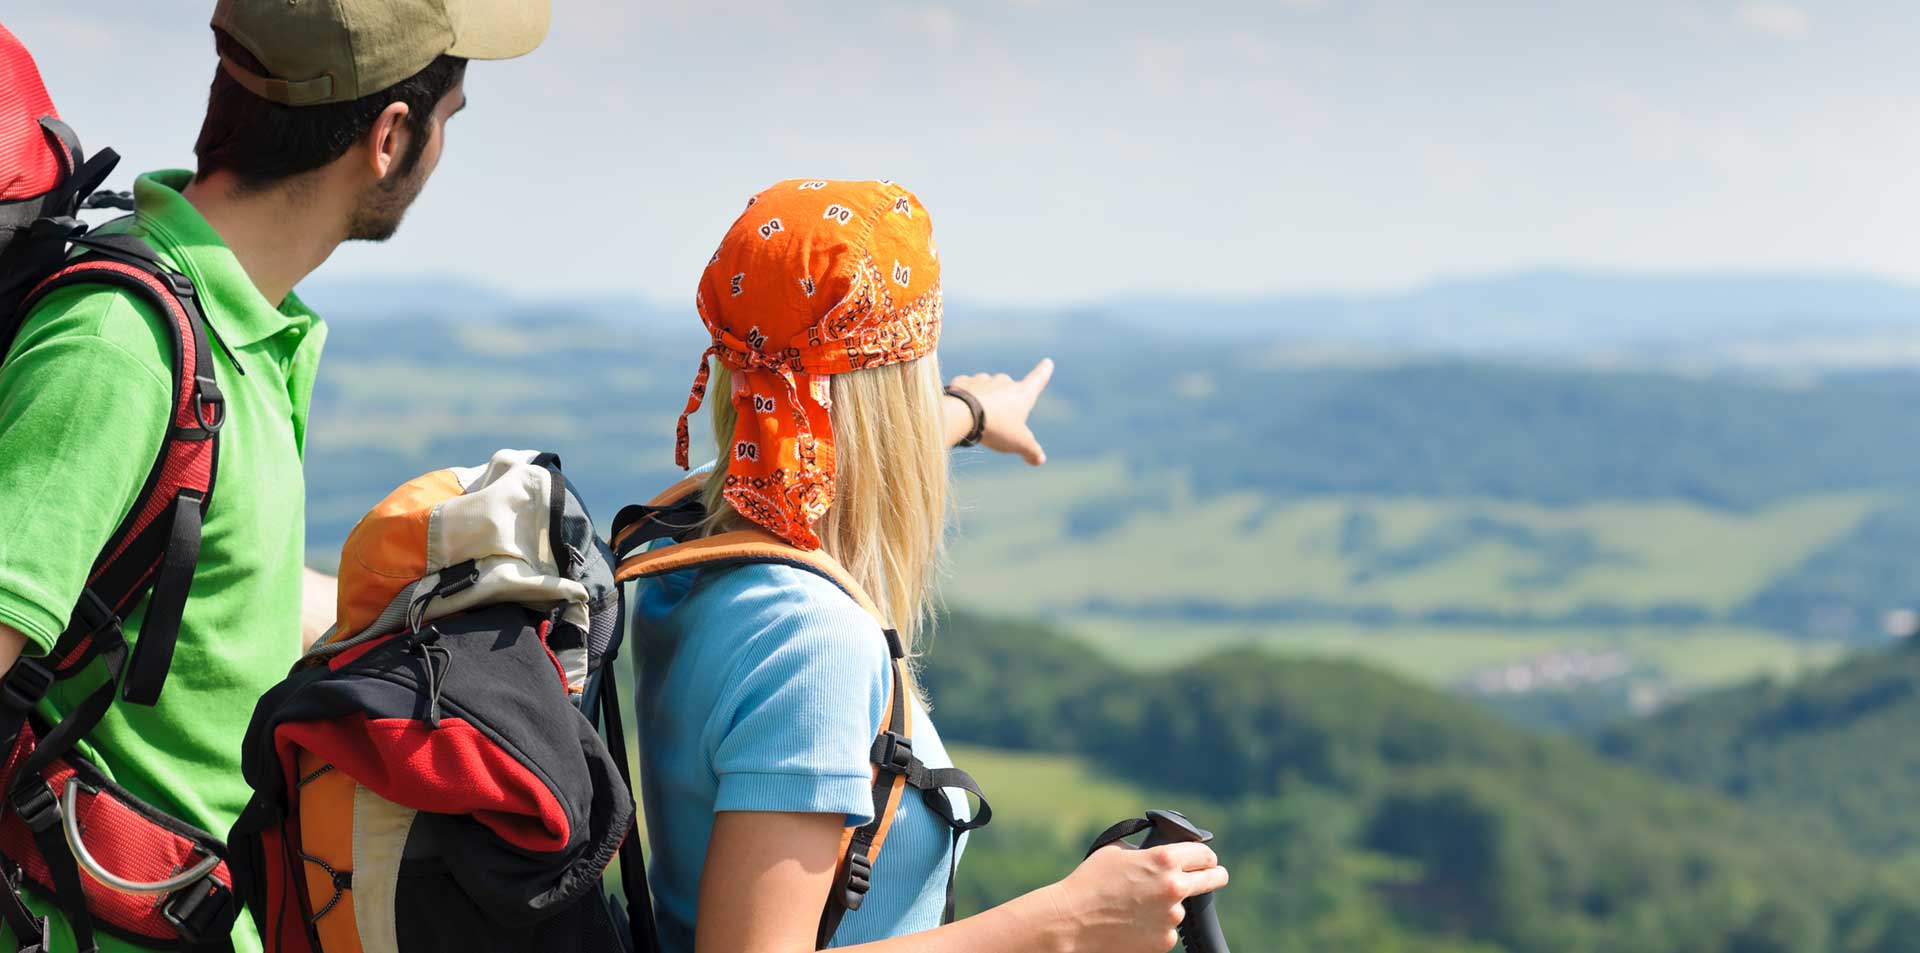 Female and Male Backpackers With Backpacks On Their Backs Looking And Pointing At Scenery While Living Working Playing and Travelling Around The World.